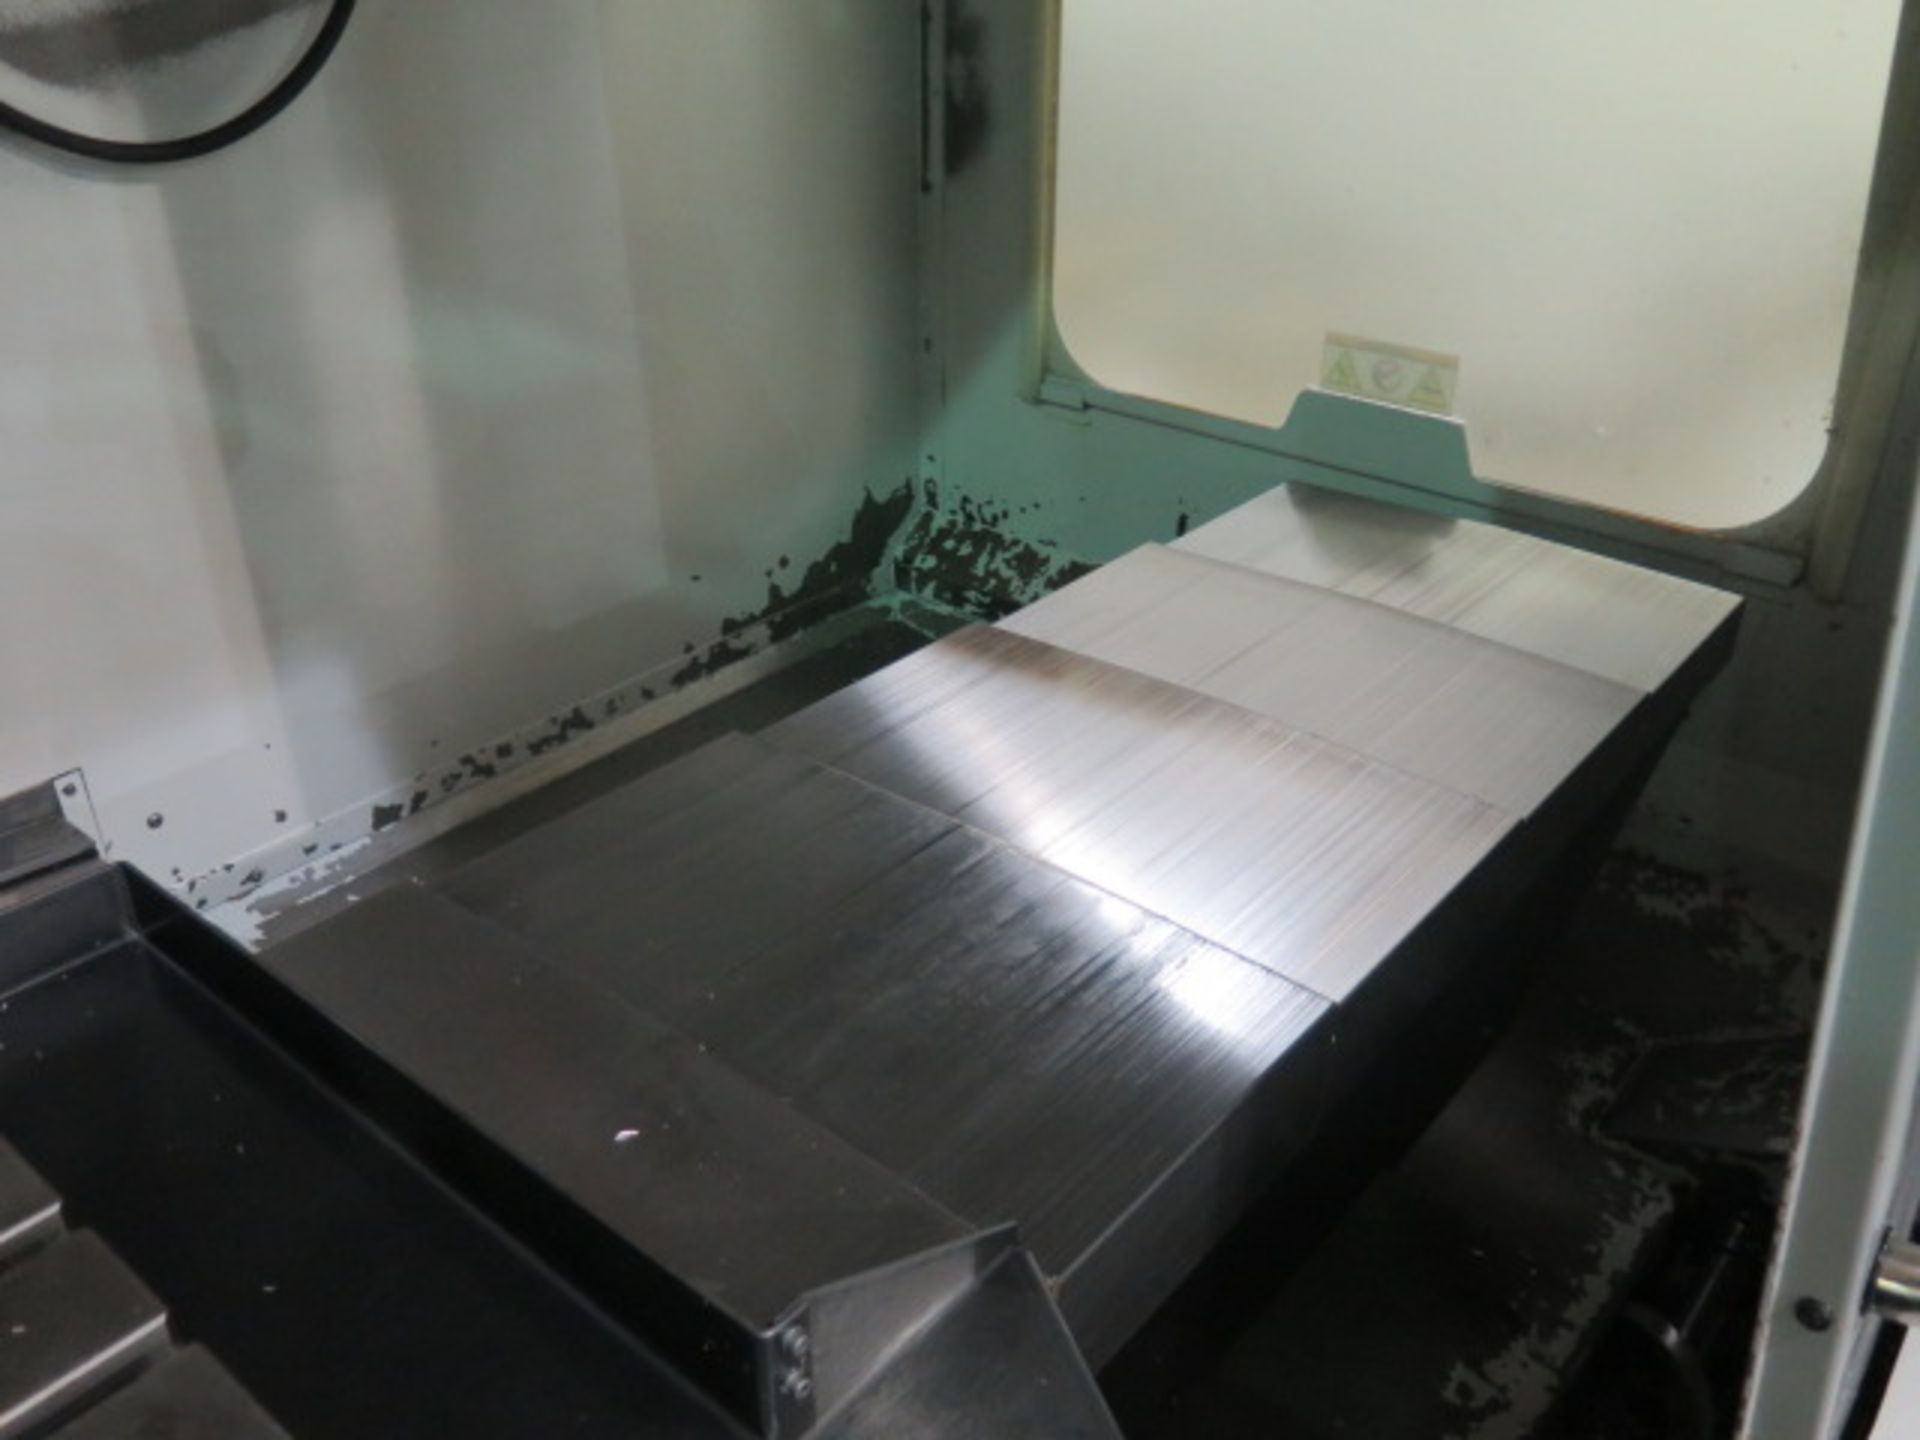 2008 Haas VF-3D 4-Axis CNC VMC s/n 1069502 w/ Haas Controls, Hand Wheel, 24-ATC, Cat 40, SOLD AS IS - Image 9 of 17